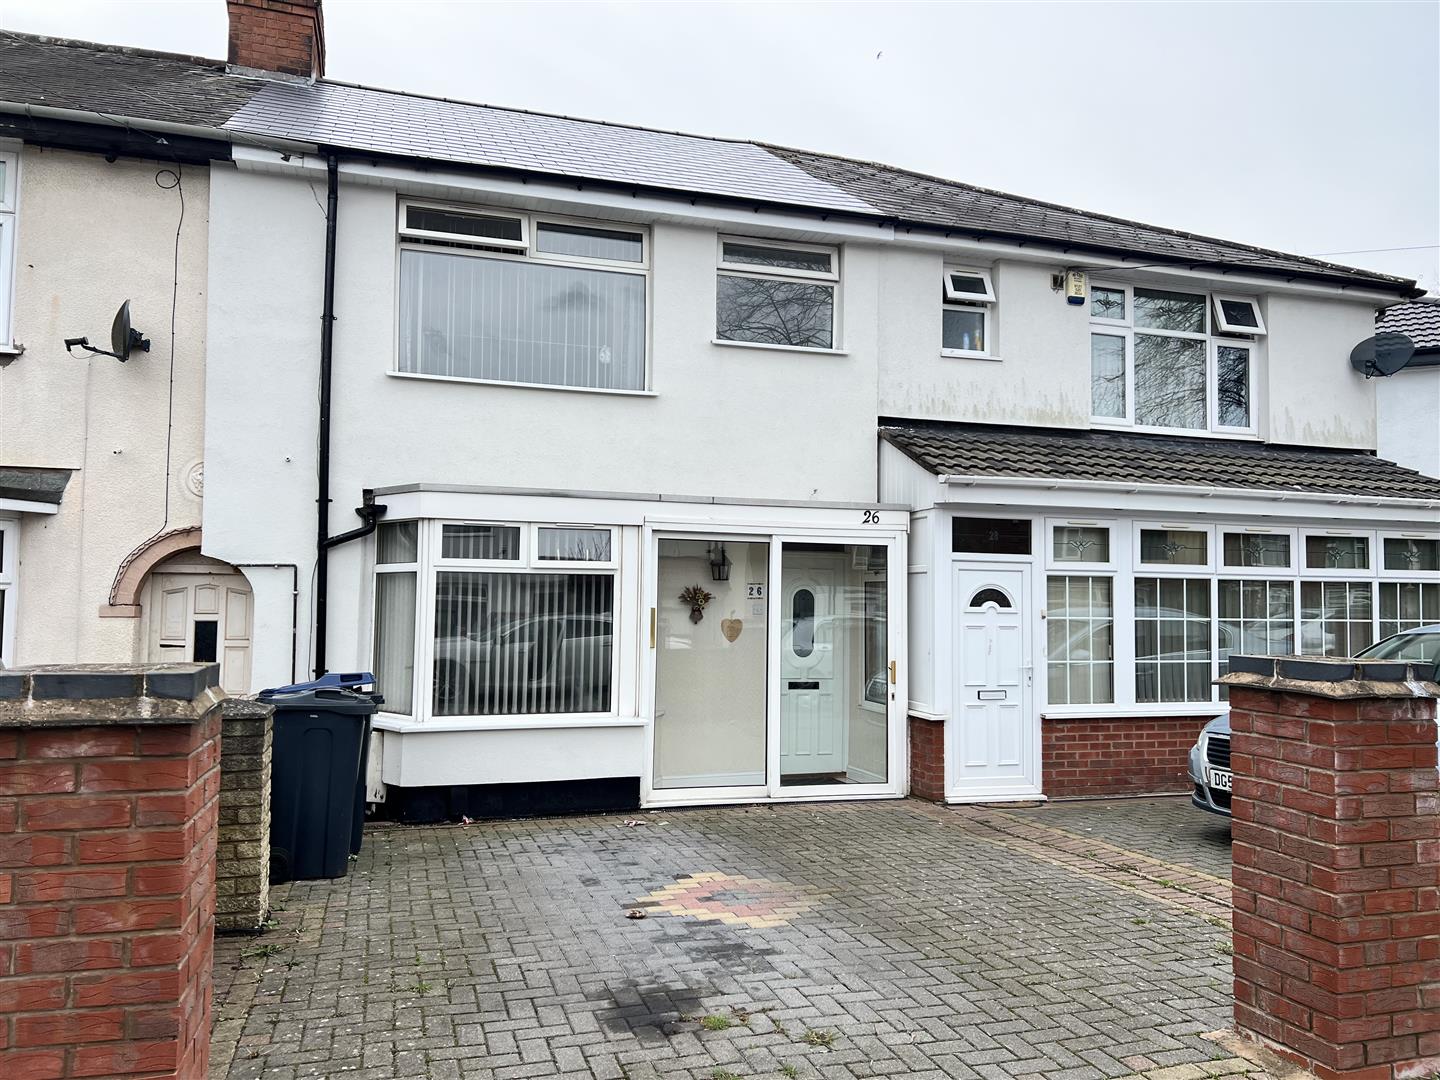 3 bed terraced house for sale in Moat House Road, Birmingham - Property Image 1